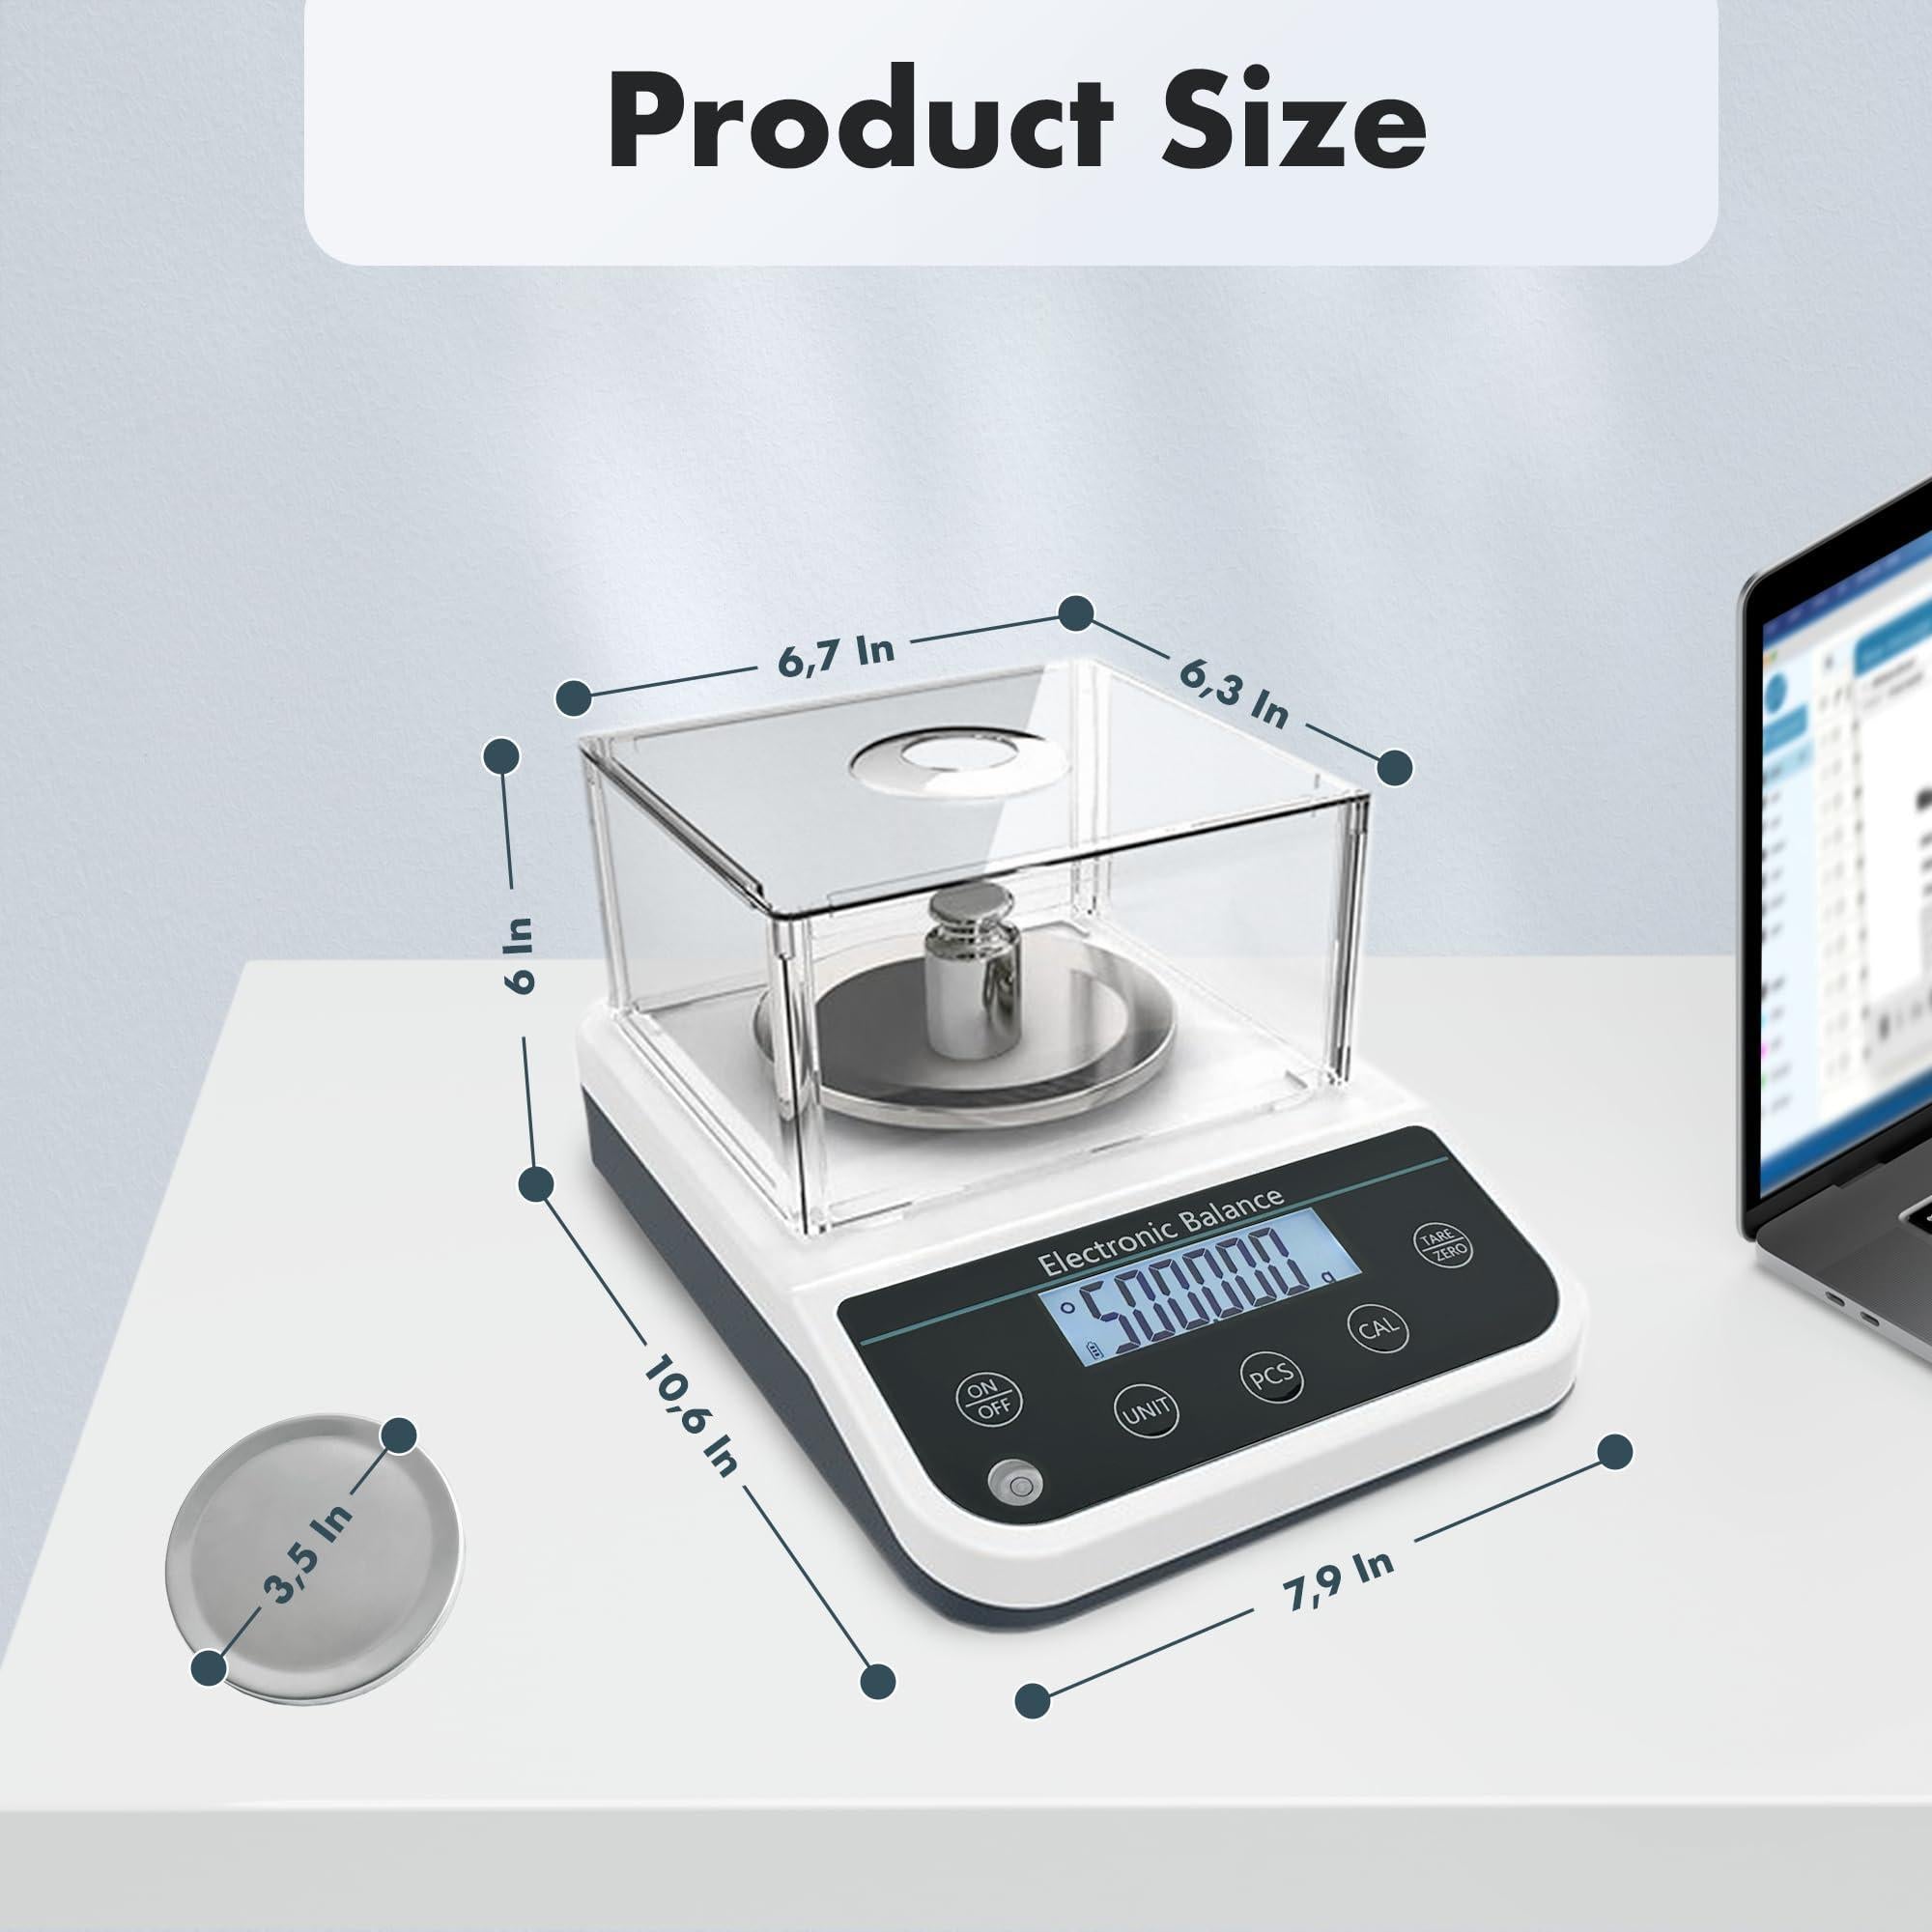 Lab Analytical Balance 600g x 0.001g High Precision Digital Scale .001 Gram Accuracy Scientific Laboratory Milligram Scale with Adapter and 500g Calibration Weight